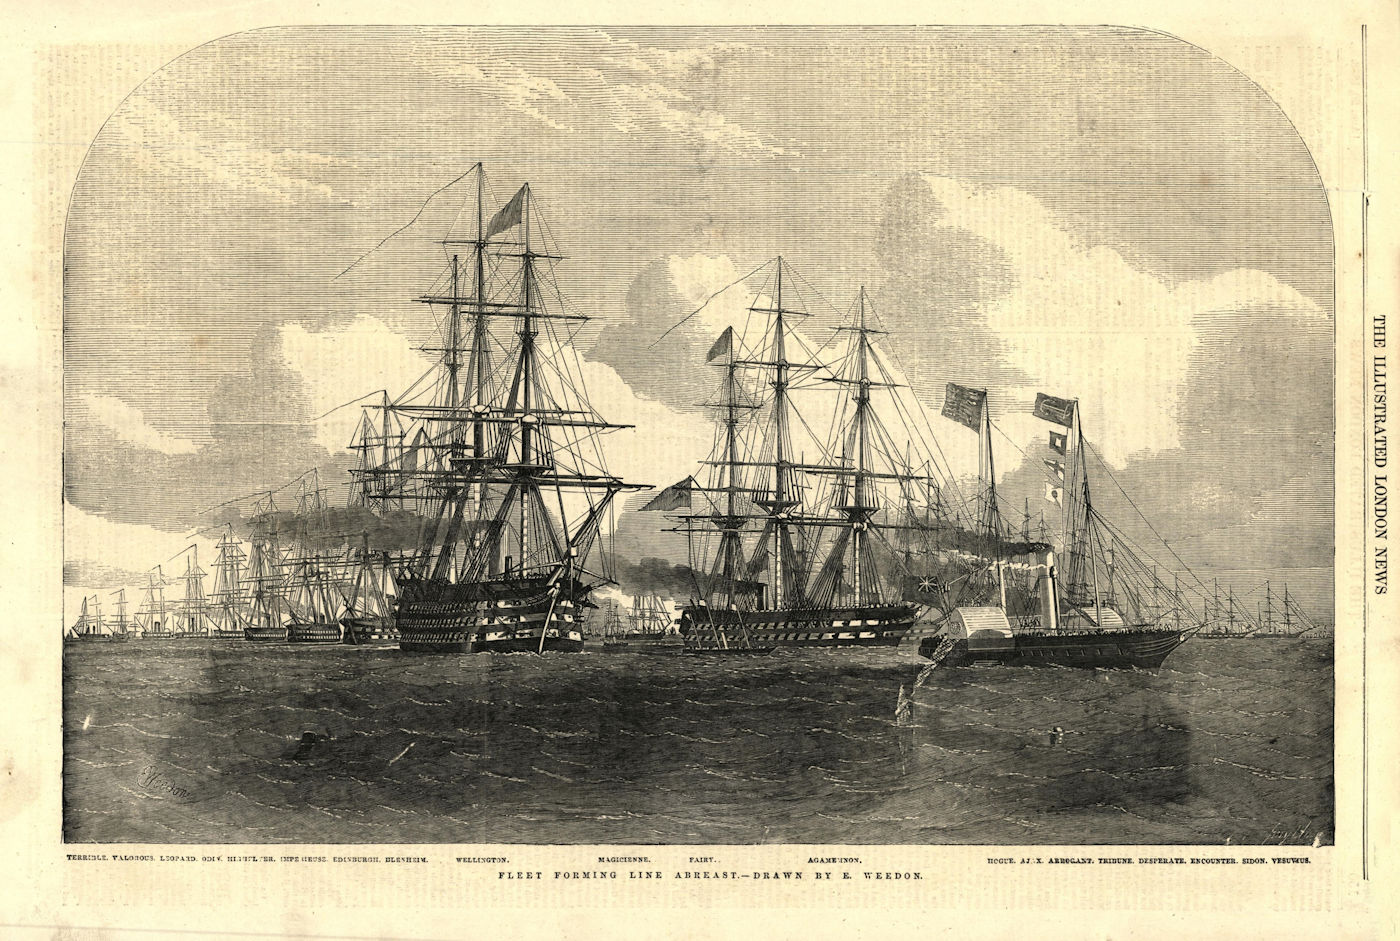 Fleet forming line abreast. Terrible Valorous Leopard Odin &c. Royal Navy 1853